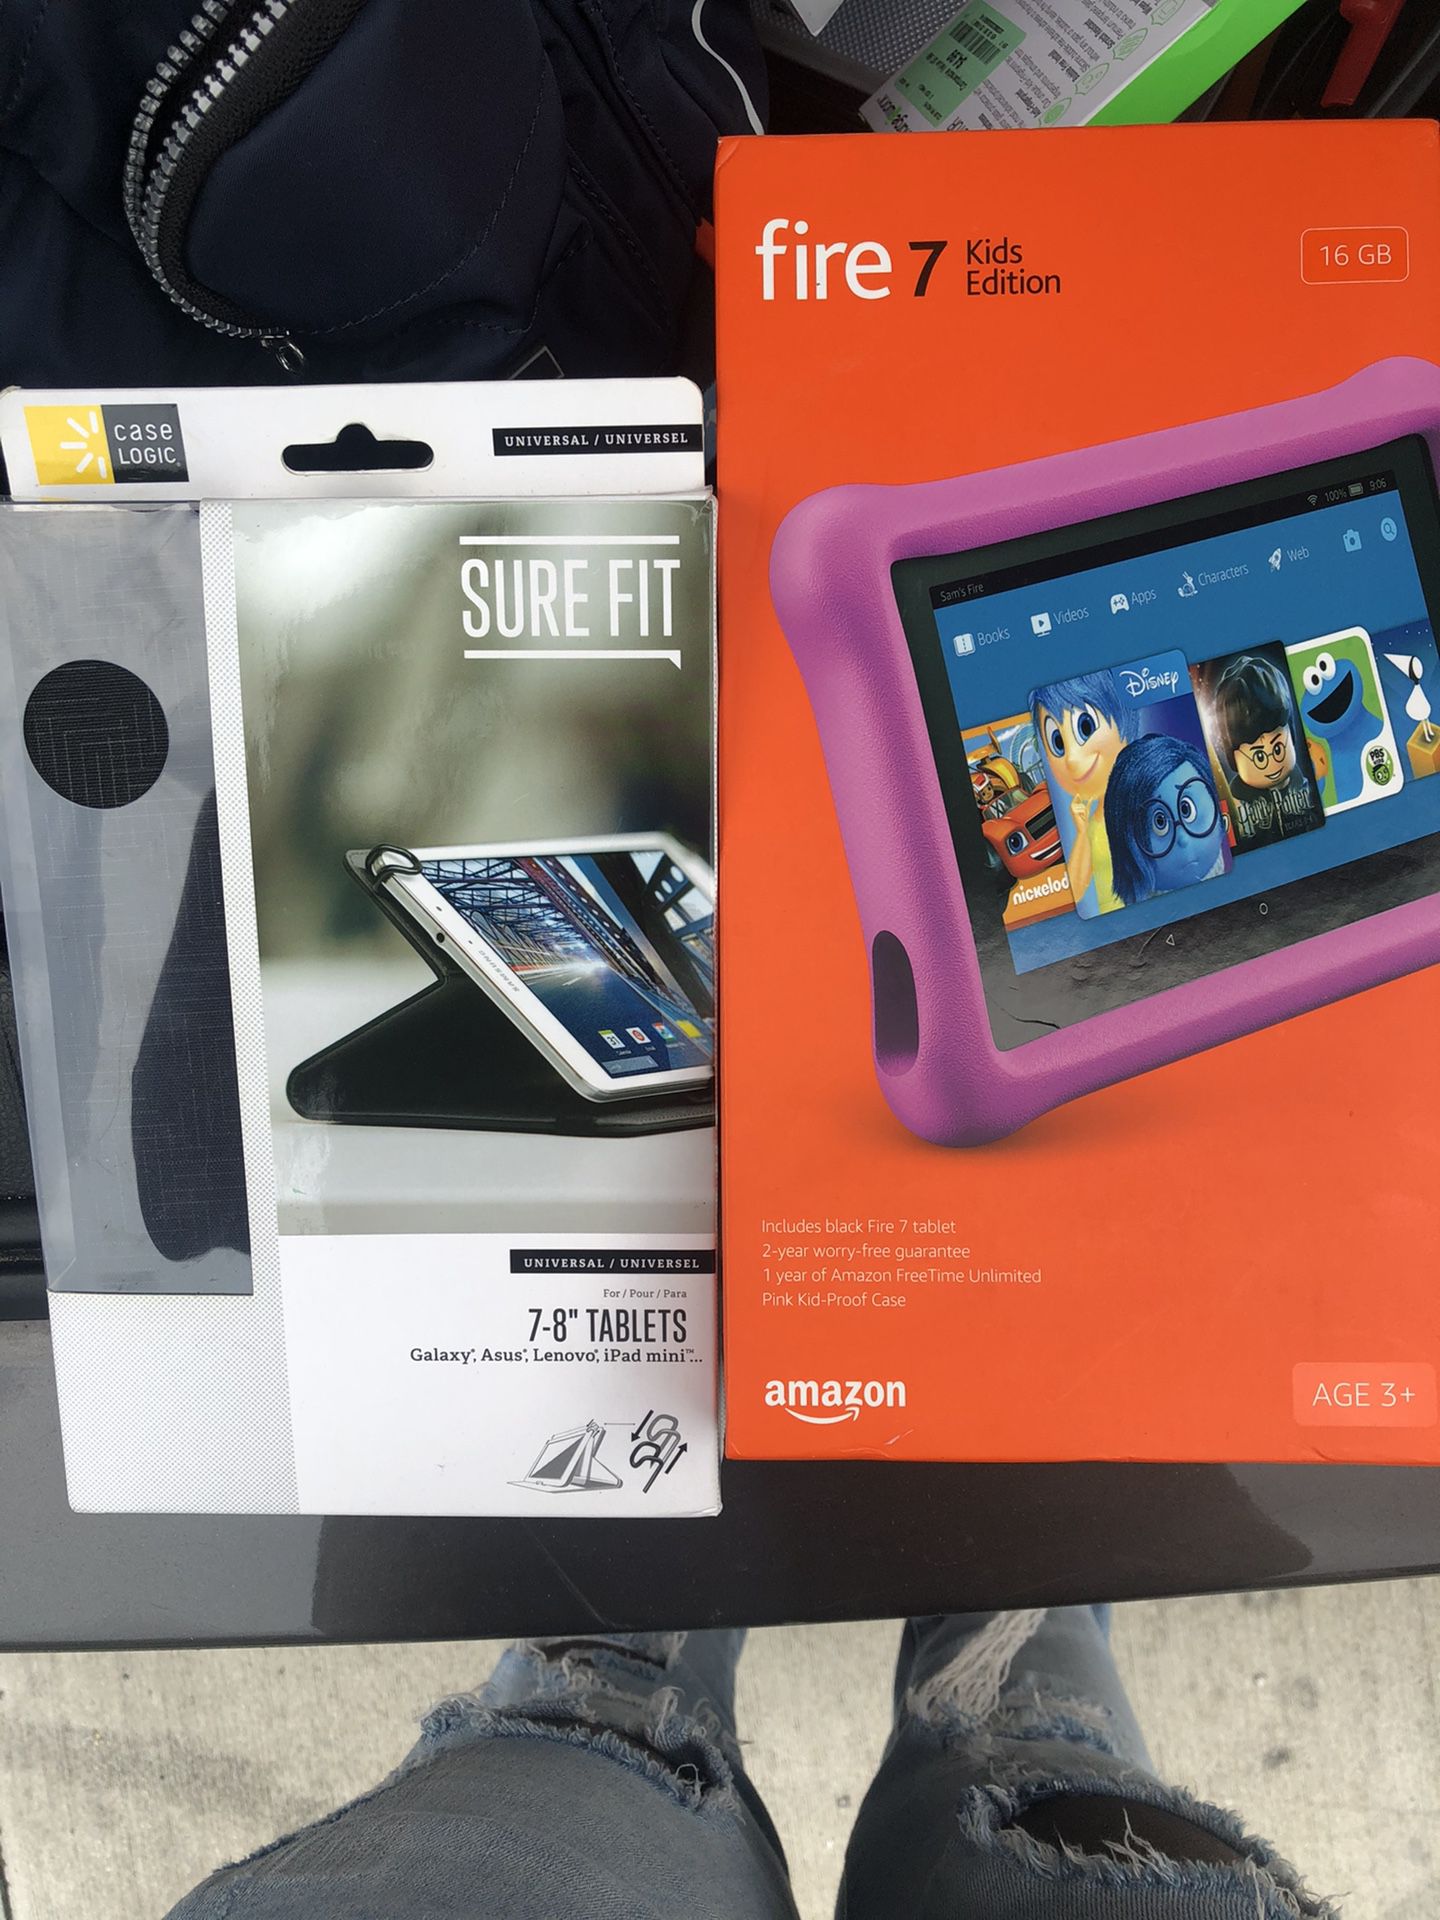 Amazon Fire 7 tablet with additional case.